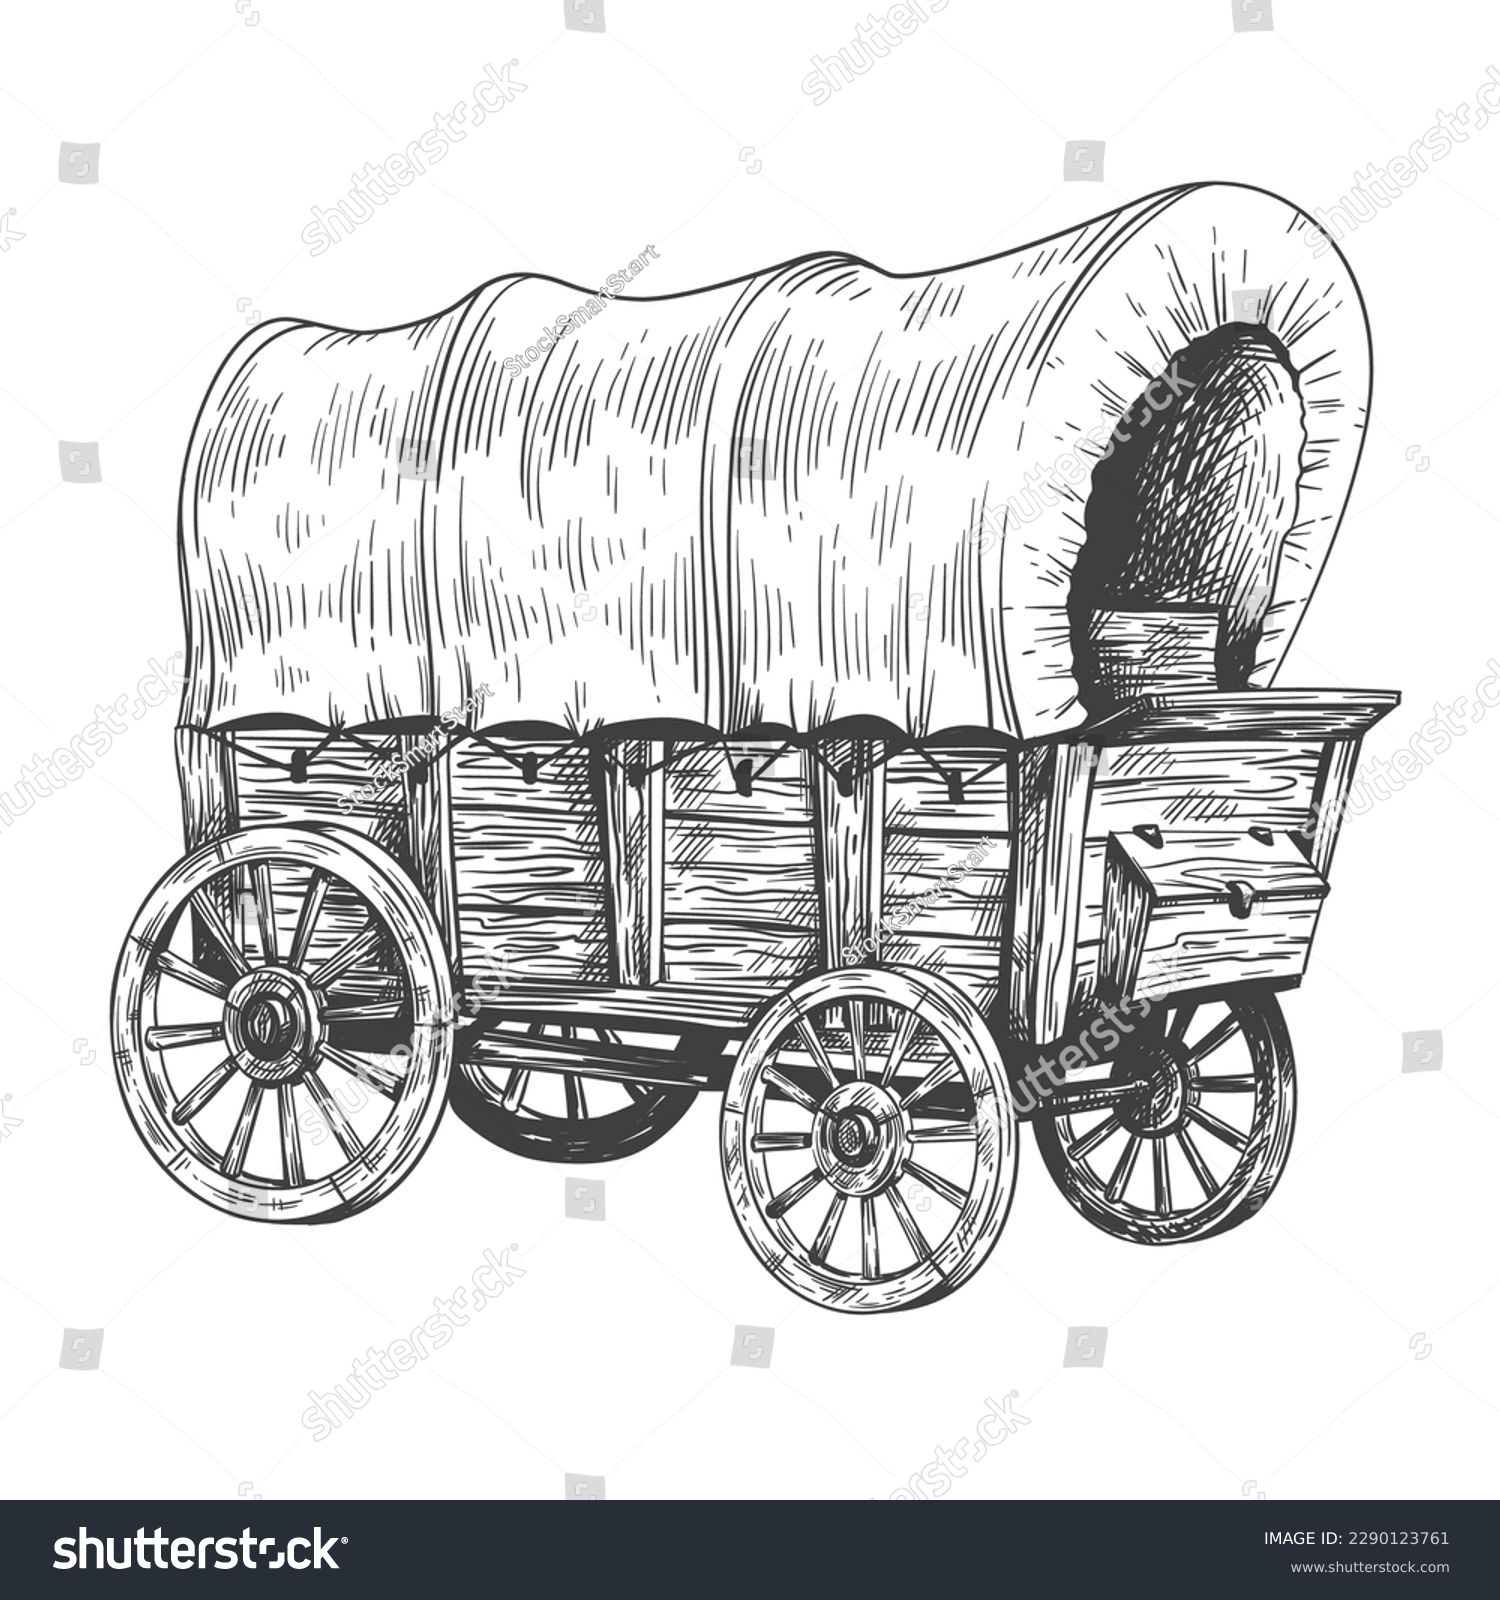 SVG of Covered wagon sketch. Old trip carriage, vintage horse vehicles drawing, wooden farming tent cart traditional western trravel cowboy pioneer vehicle vector illustration of carriage or wagon sketch svg